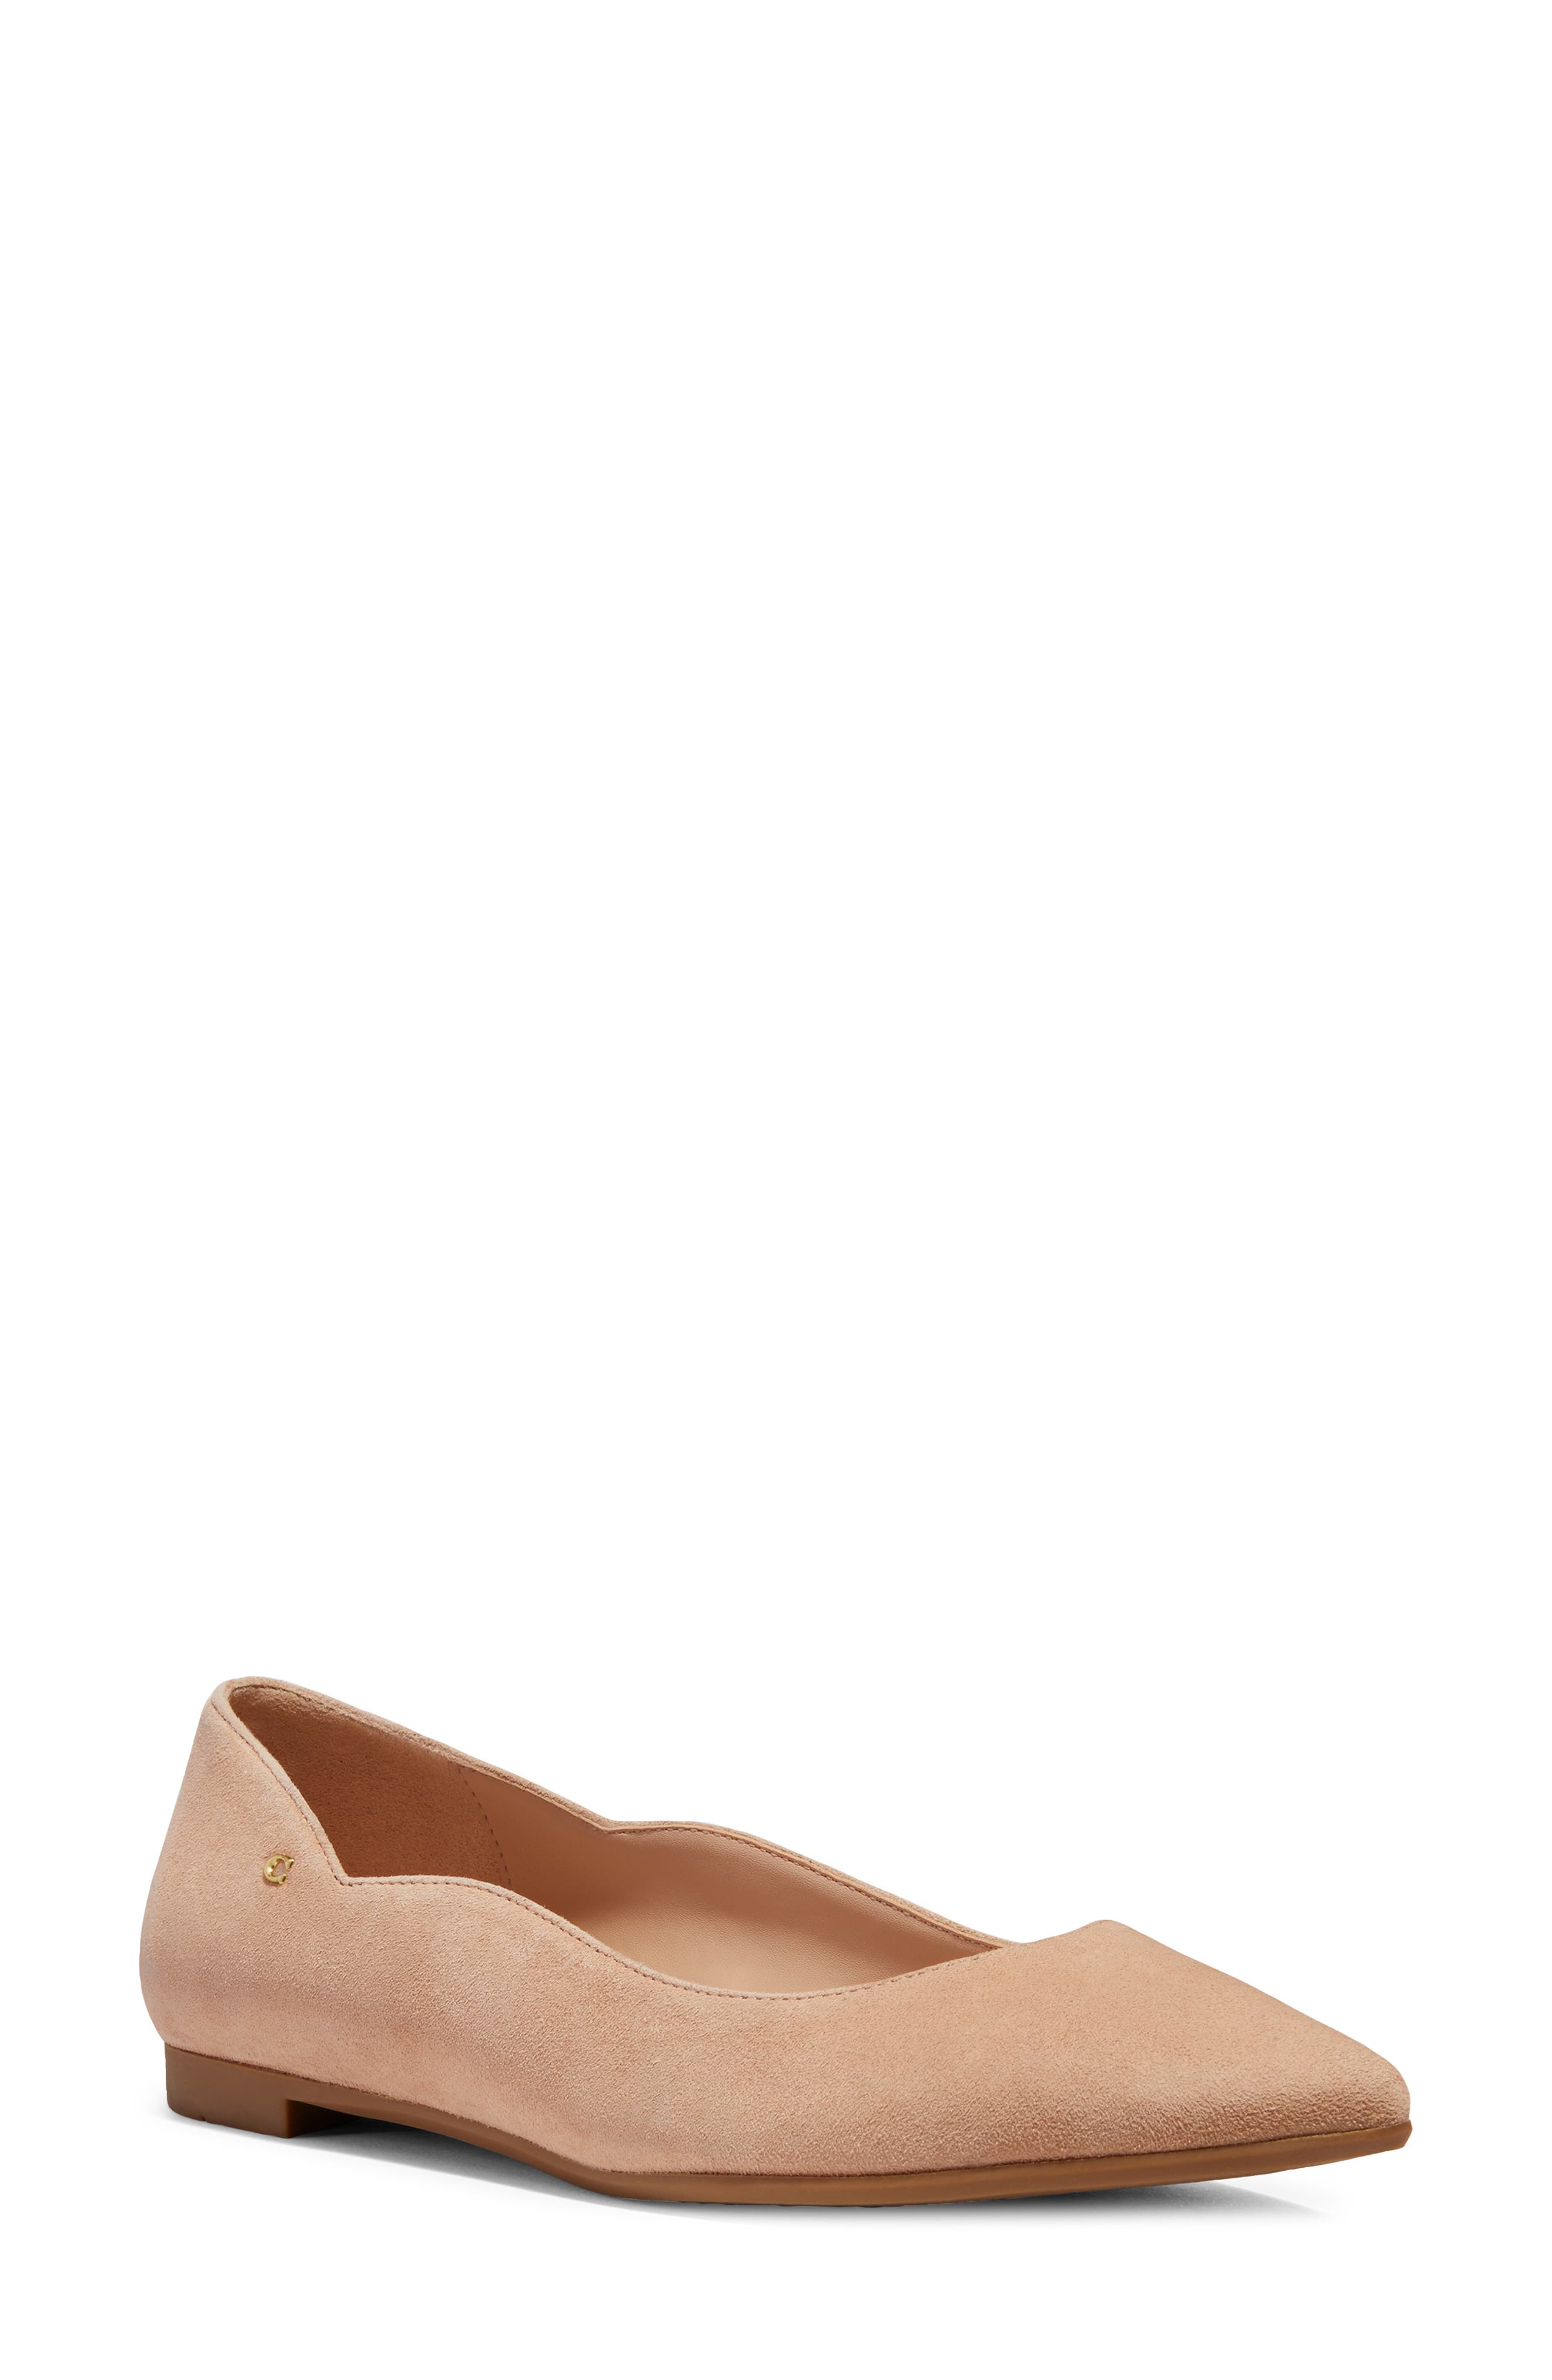 Women's Pointed Toe Flats | Nordstrom